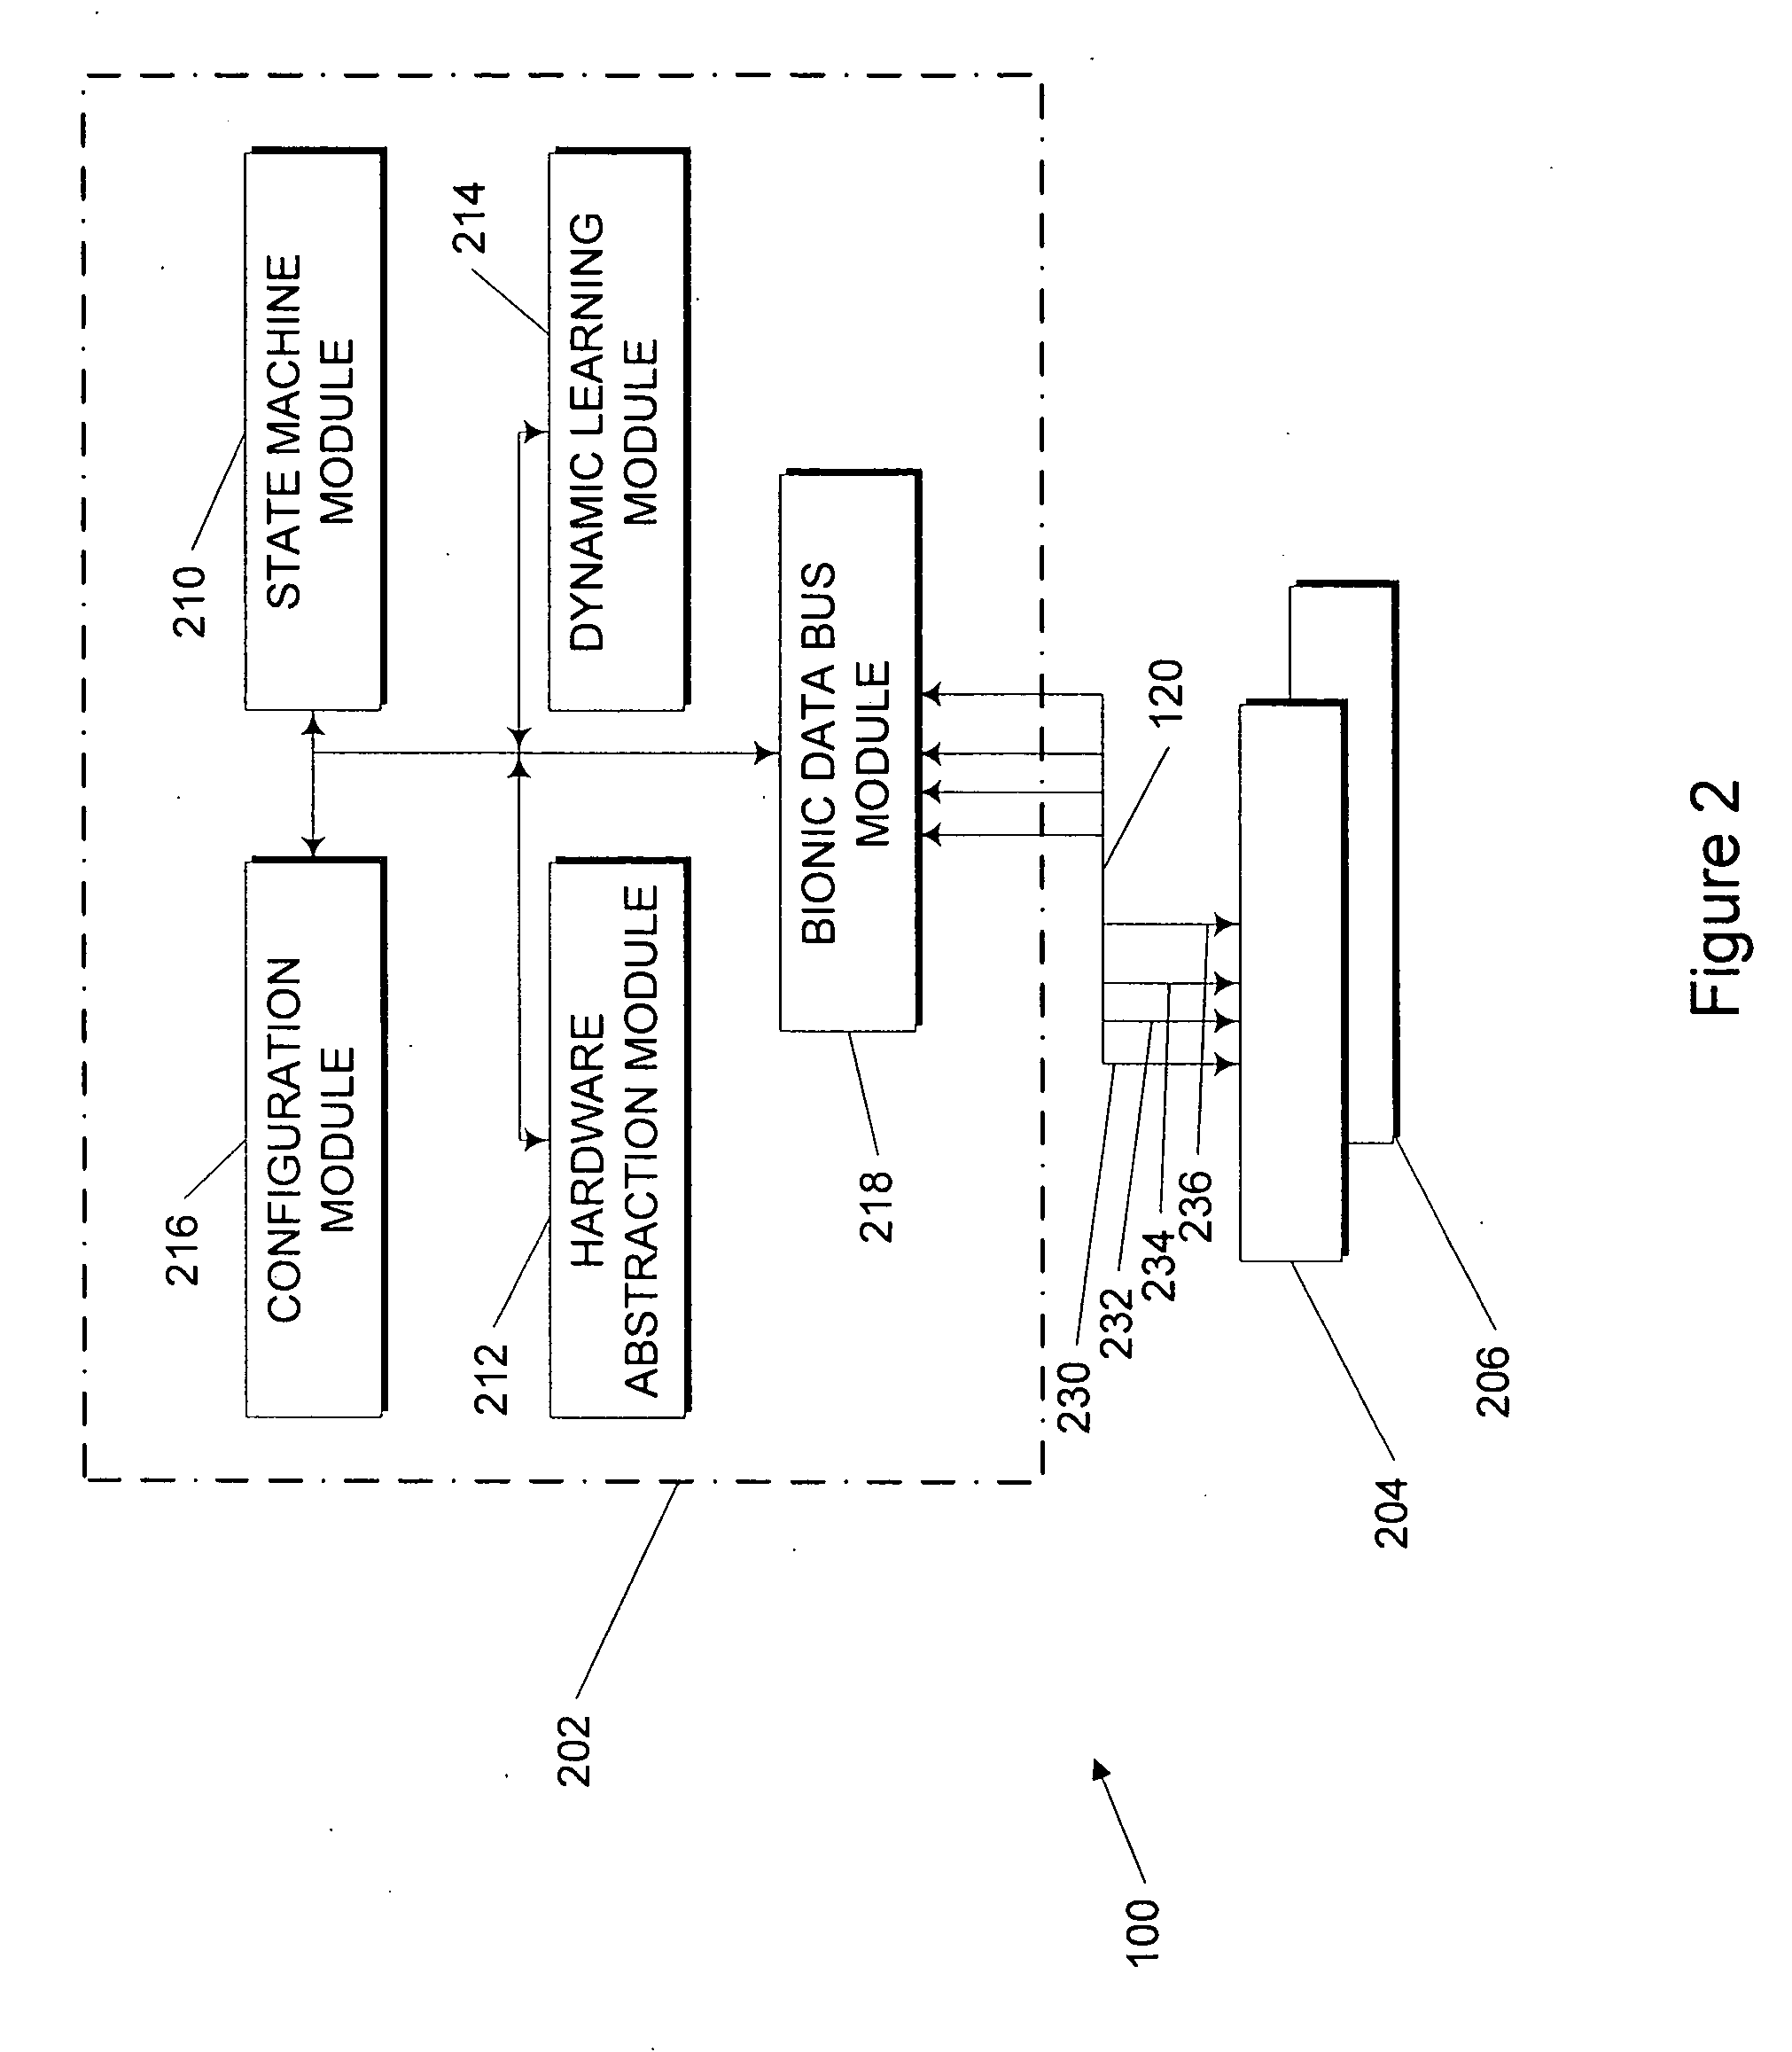 System and method of synchronizing mechatronic devices